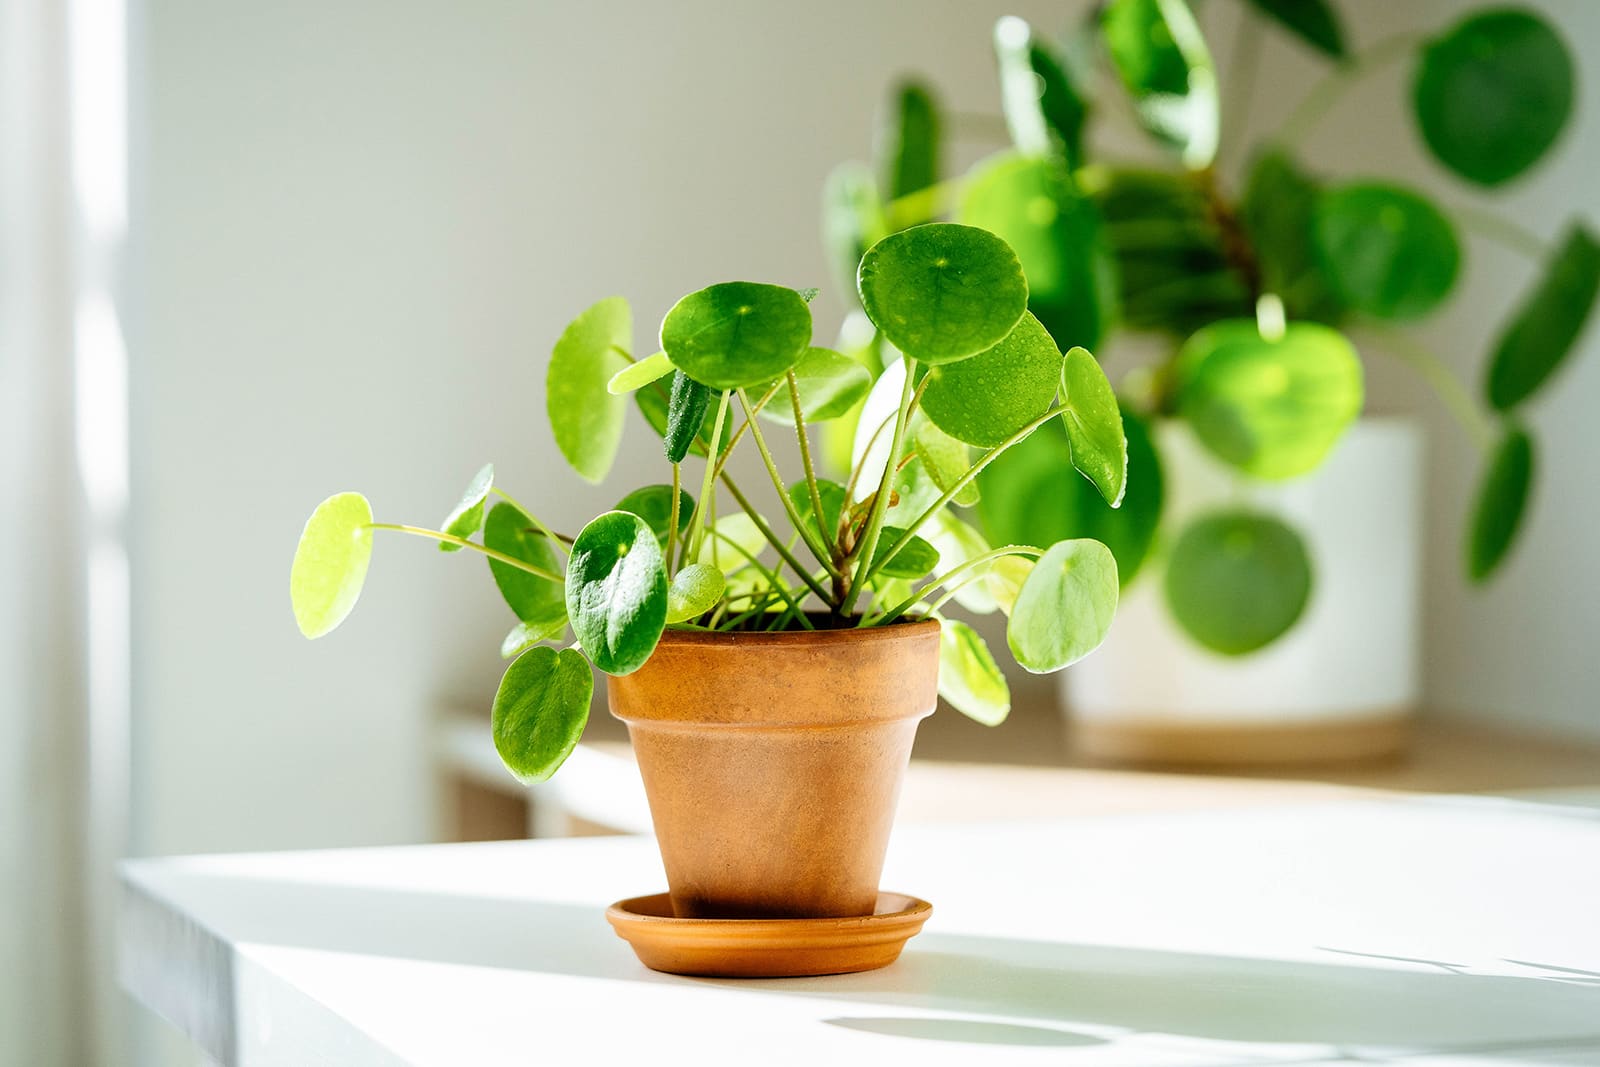 Pilea peperomioides (Chinese money plant) in terracotta pot on a white table with another houseplant blurred in the background